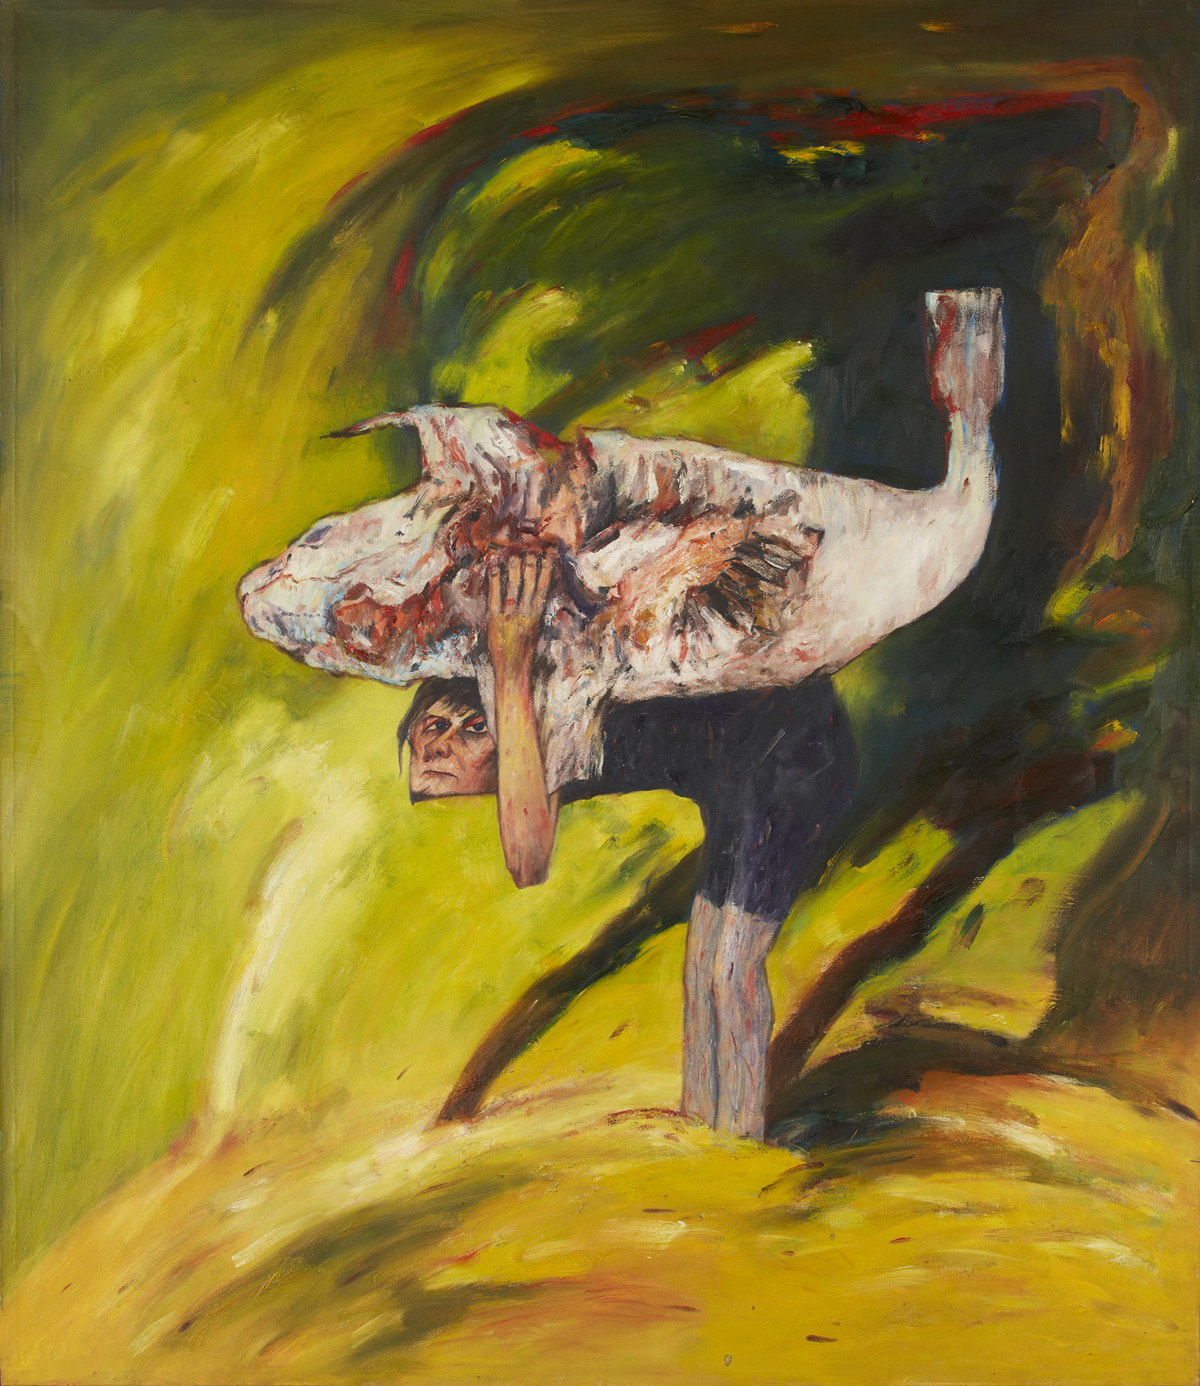 The Burden (1971), Oil on Canvas, 72 x 62 inches